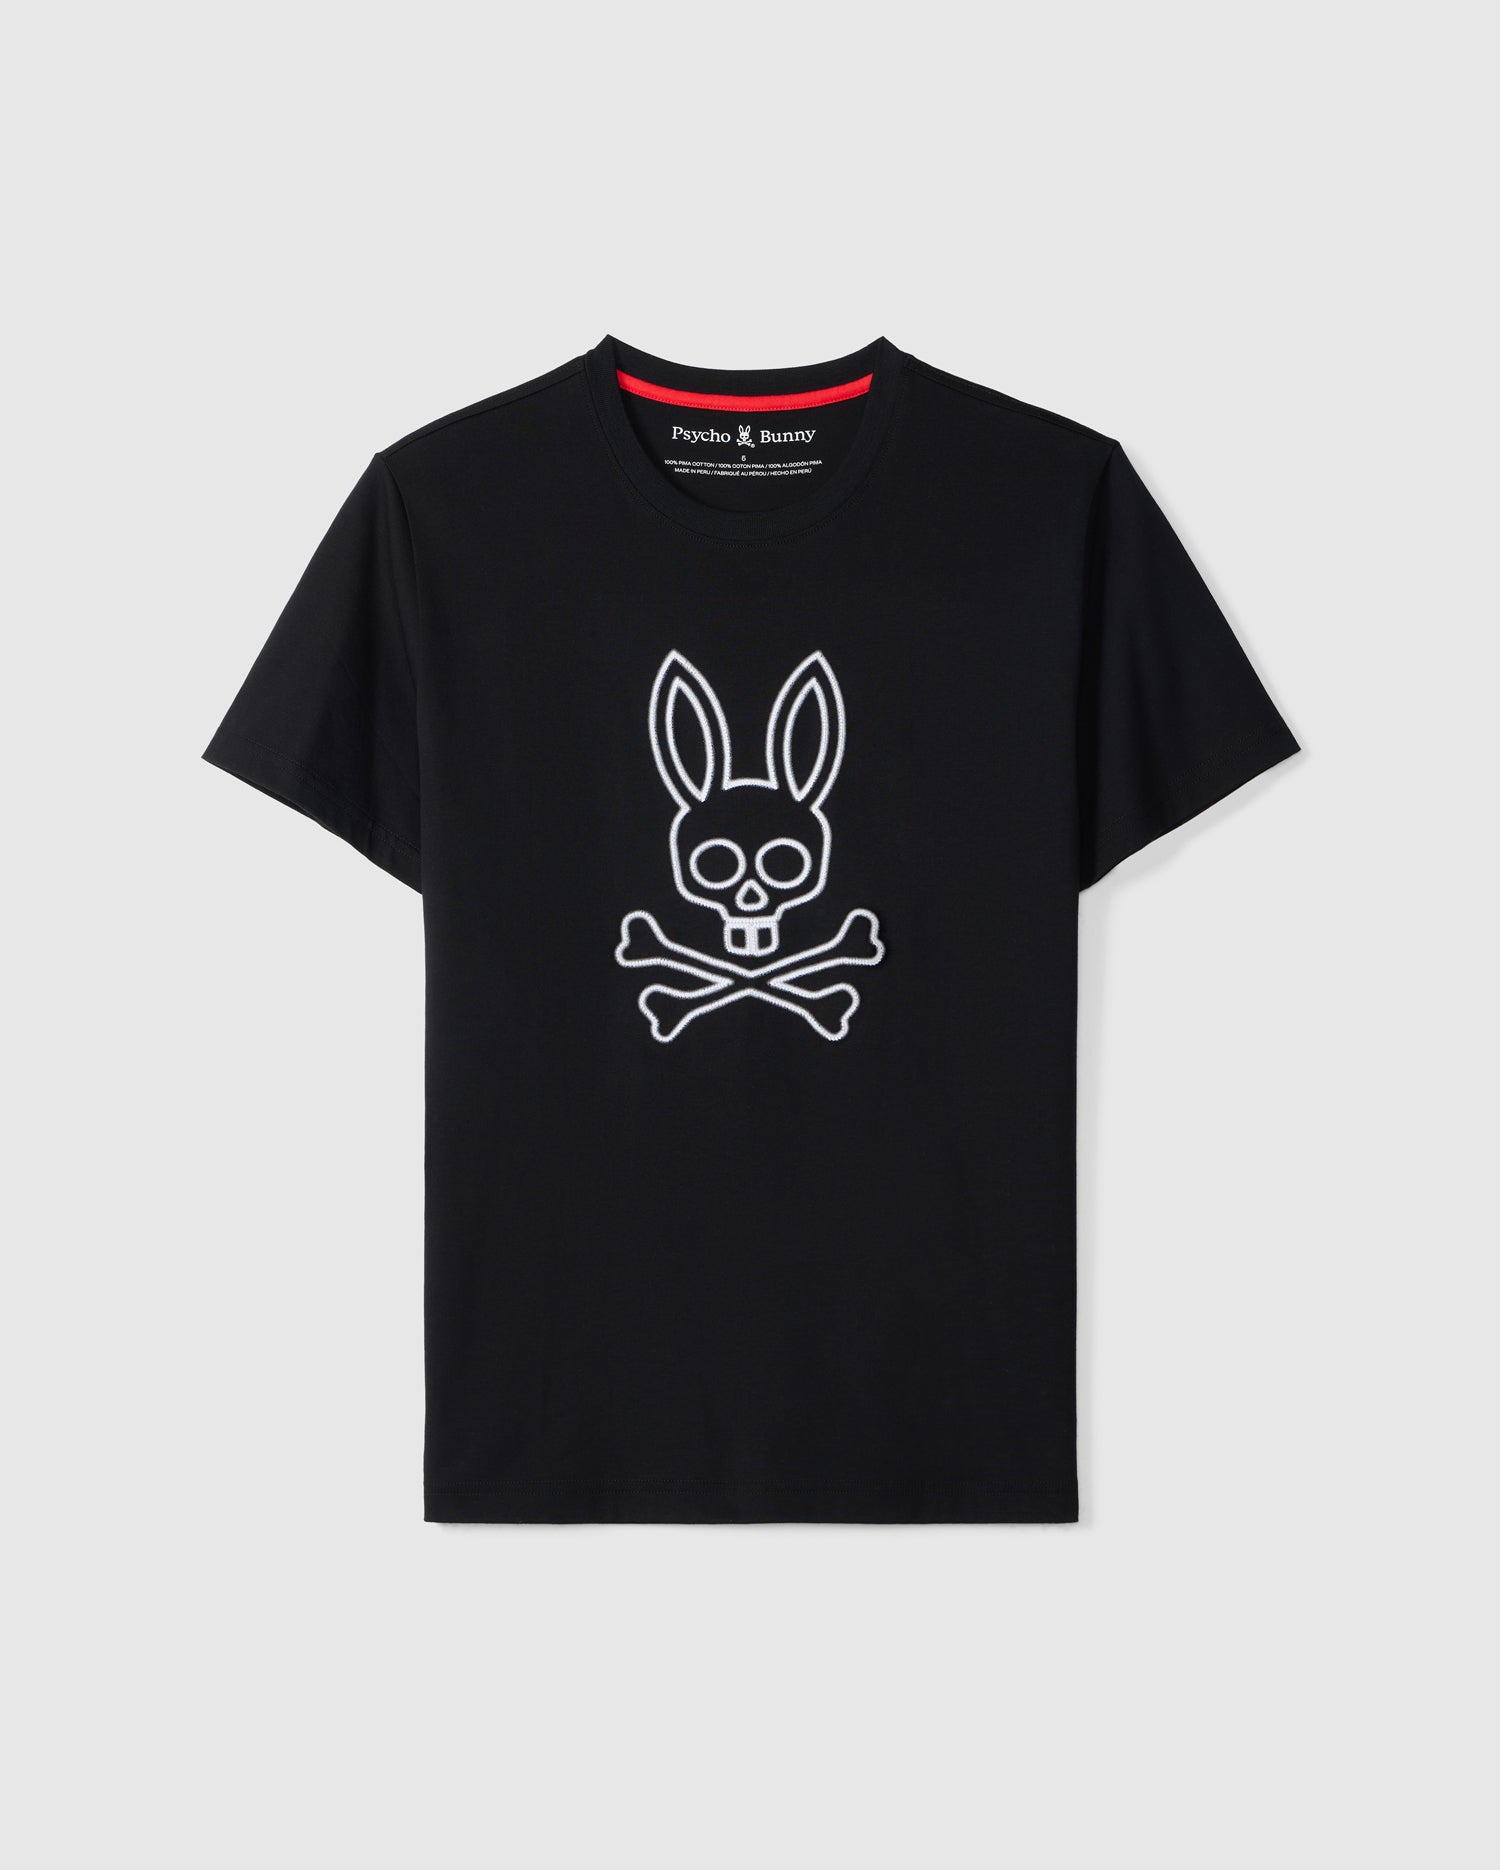 A black Pima cotton MENS SHELDON GRAPHIC TEE - B6U569C200 featuring a white design of a bunny skull and crossbones on the front. The unique blend of a bunny's head with crossbones gives it an edge. The inside neckline has a brand label with the text 